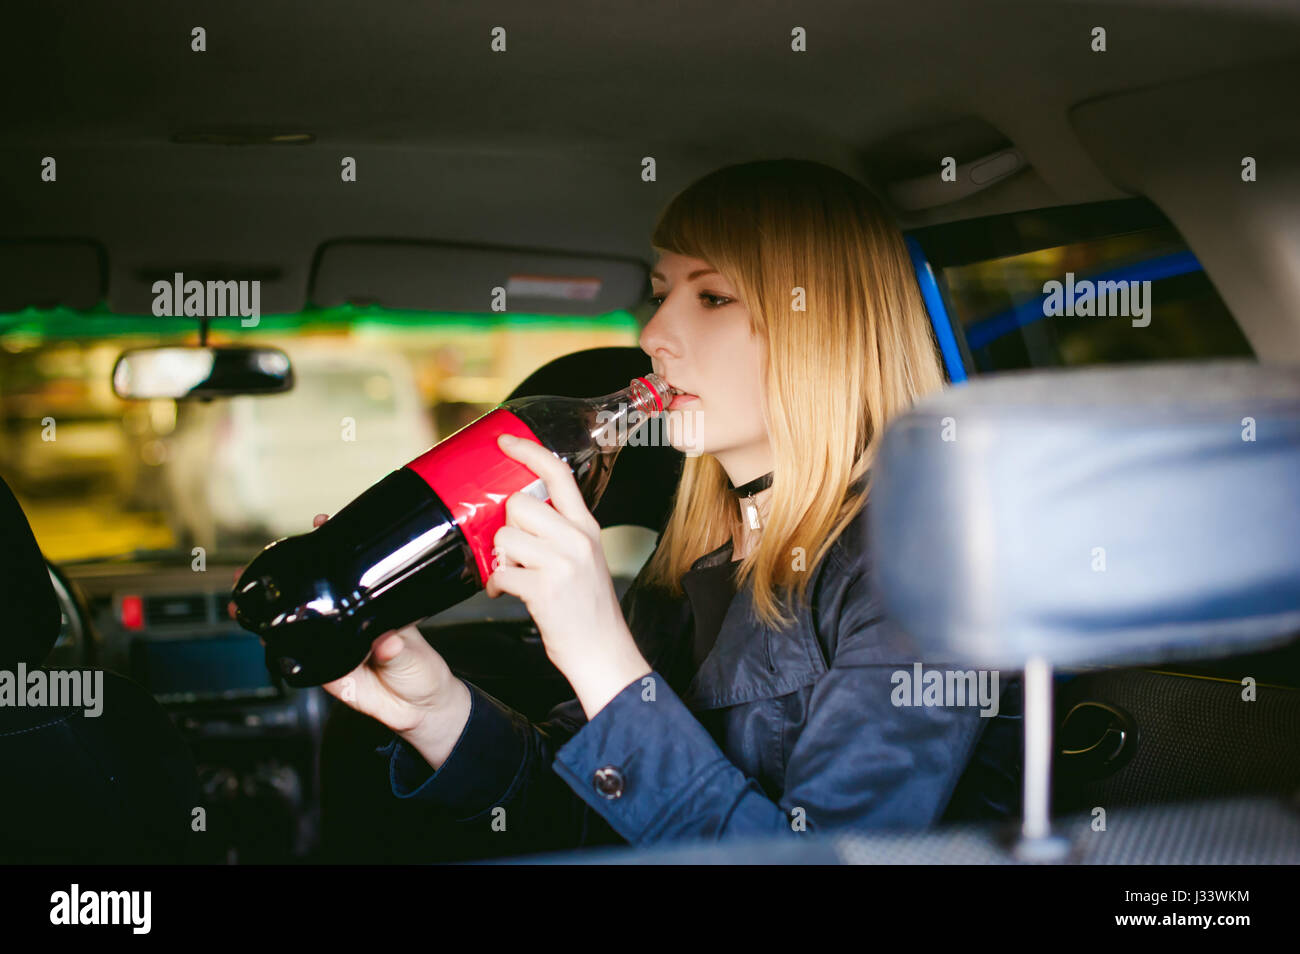 portrait of blonde woman drinking from large drink bottle, quenching thirst, sitting in car in back seat, photo is taken from rear of vehicle Stock Photo